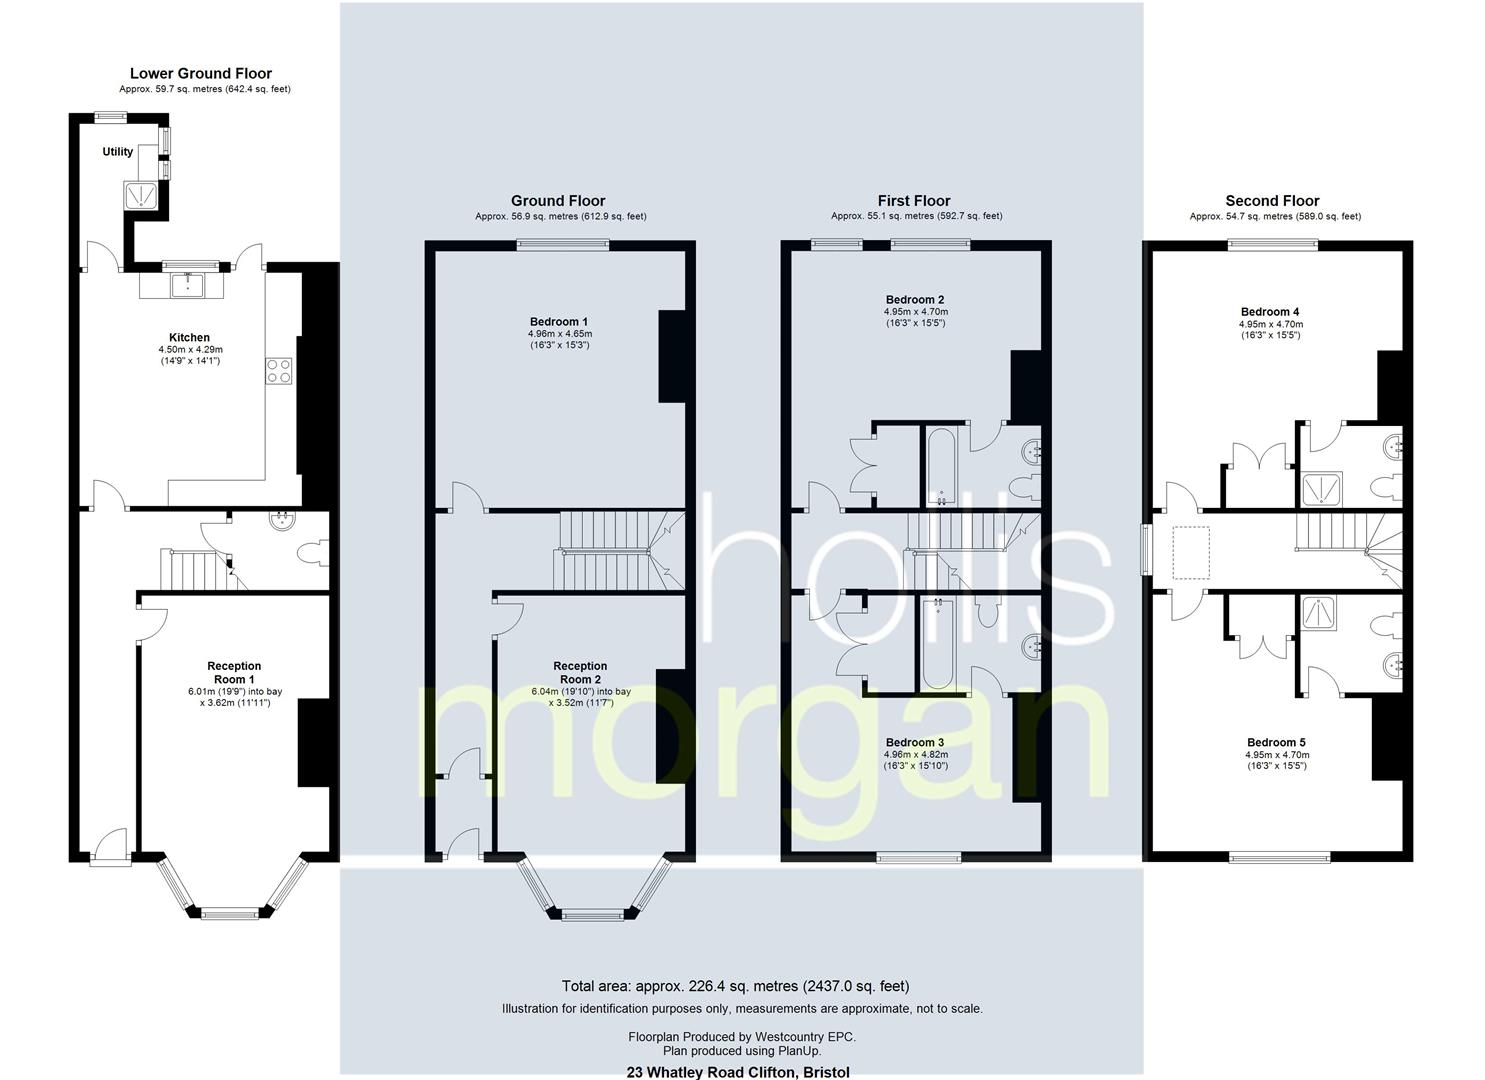 Floorplans For CLIFTON TOWNHOUSE / HMO FOR BASIC UPDATING